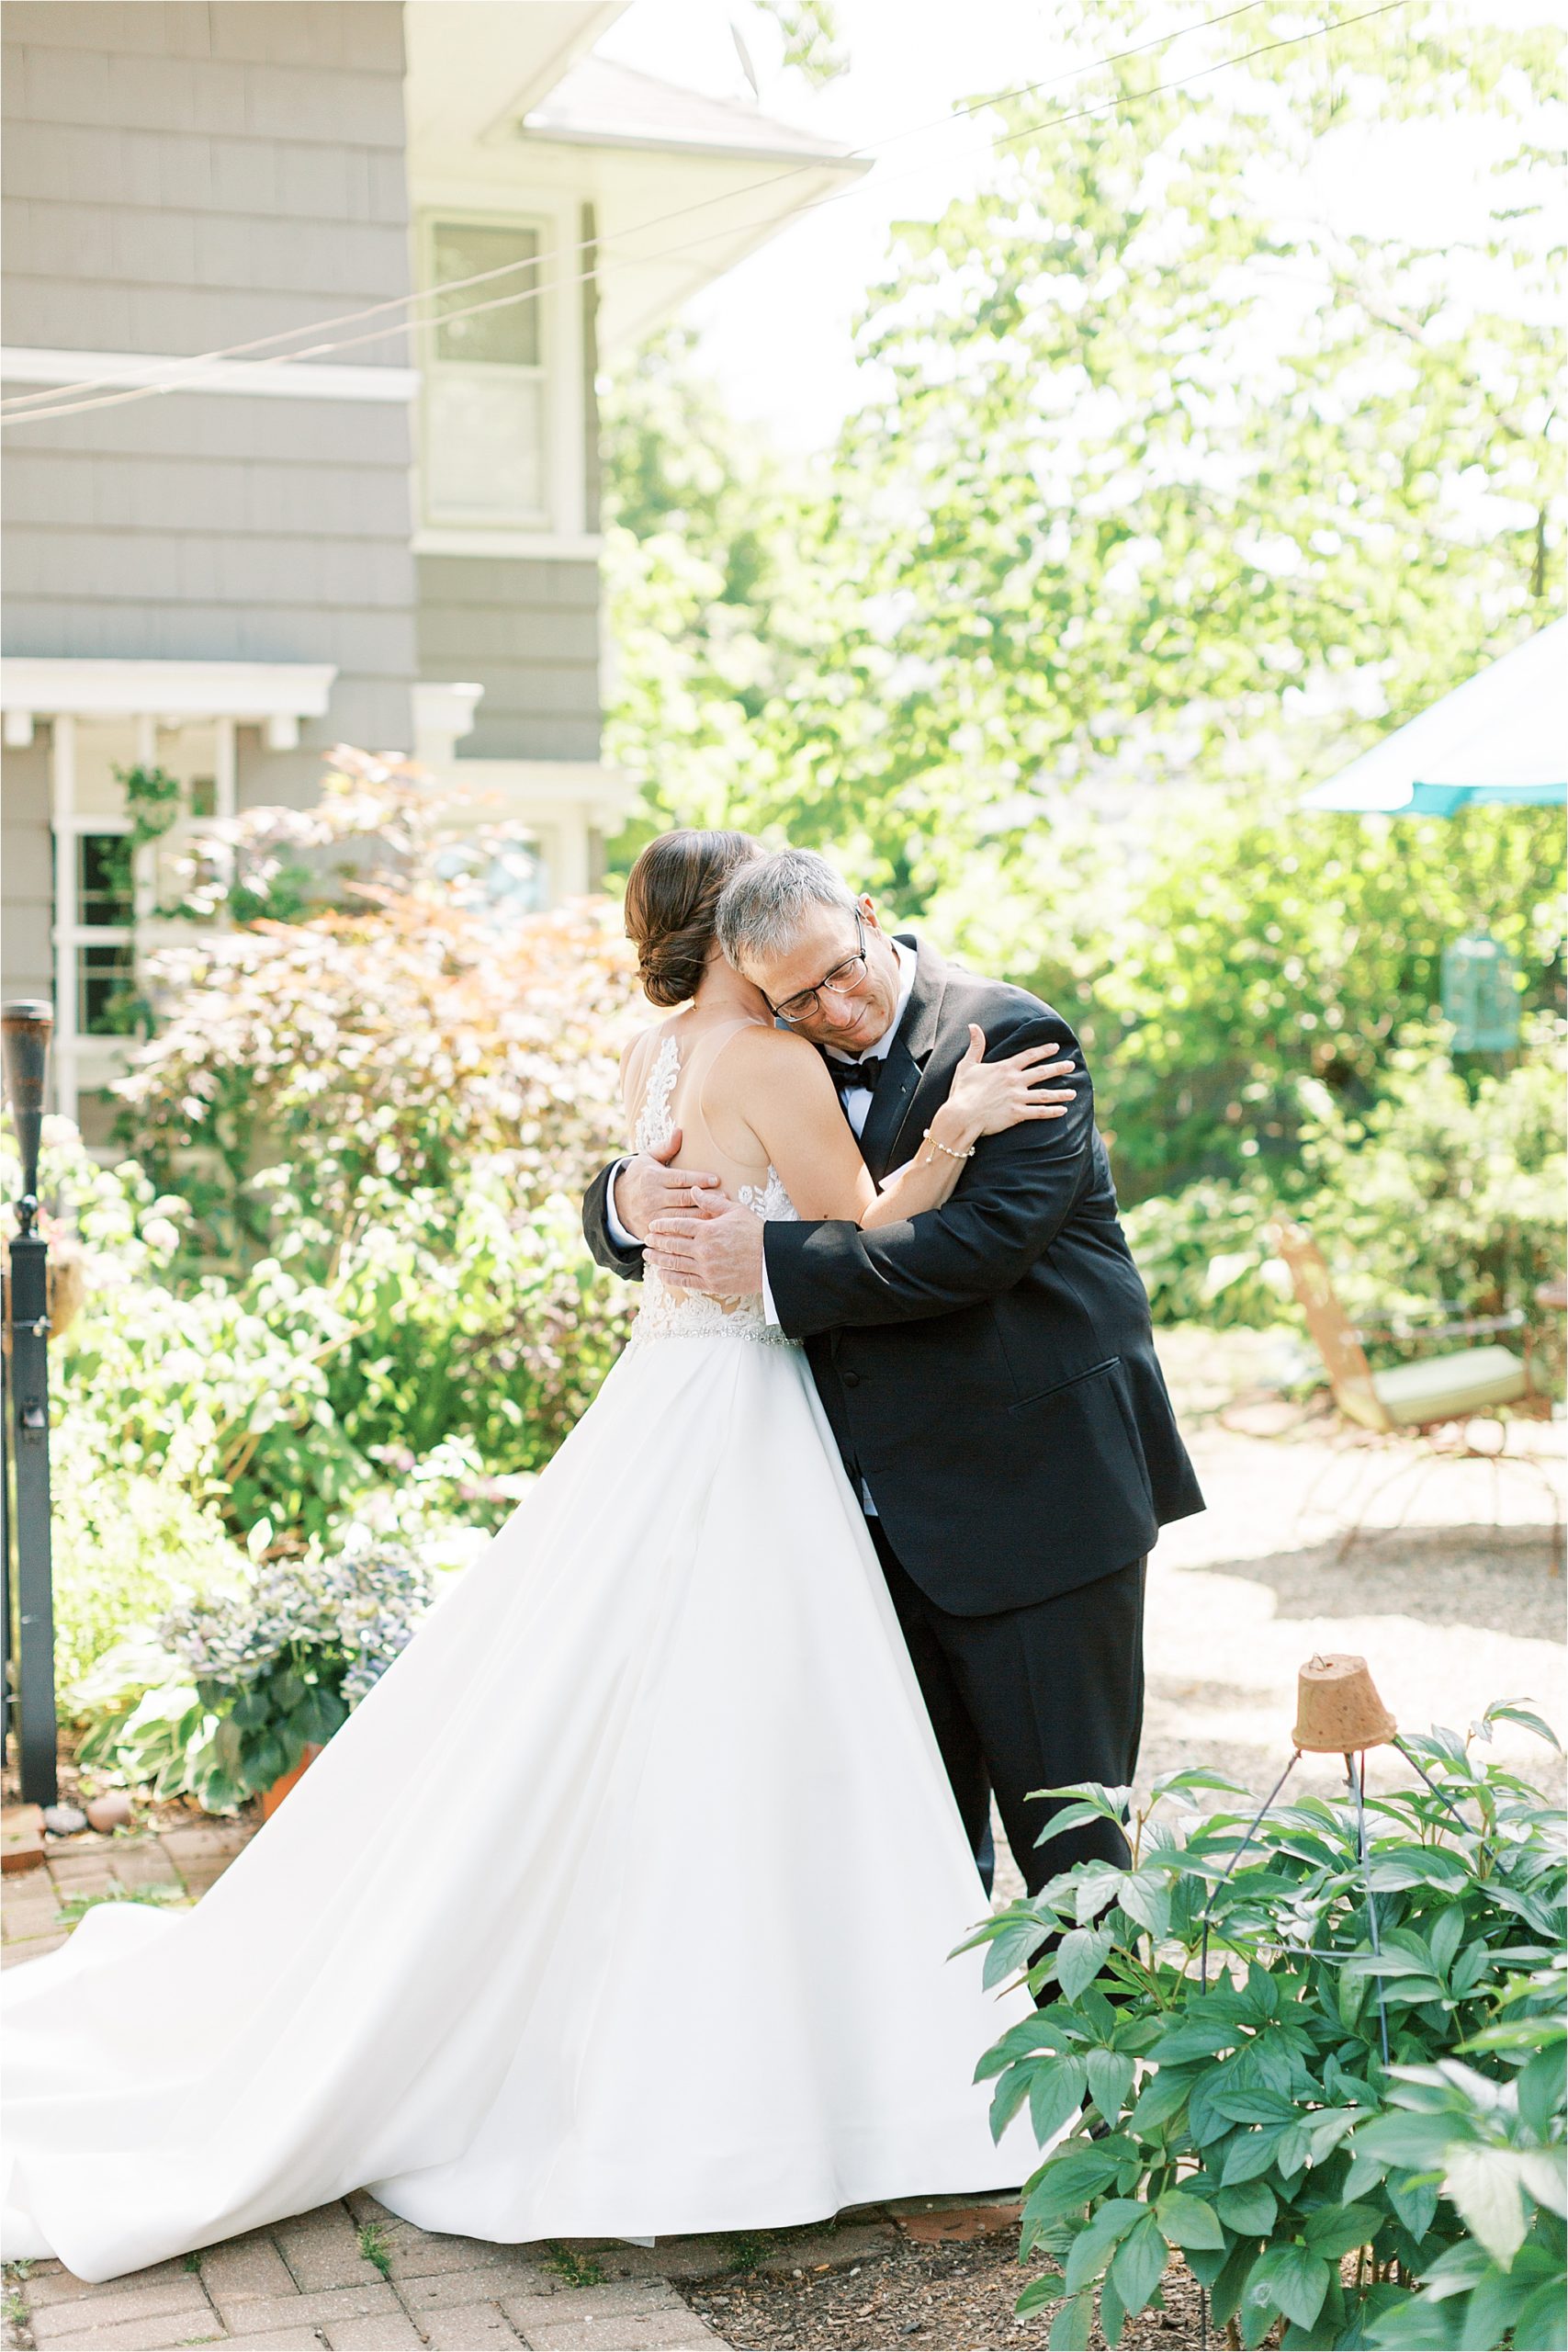 Emotional father hugs his daughter in wedding gown